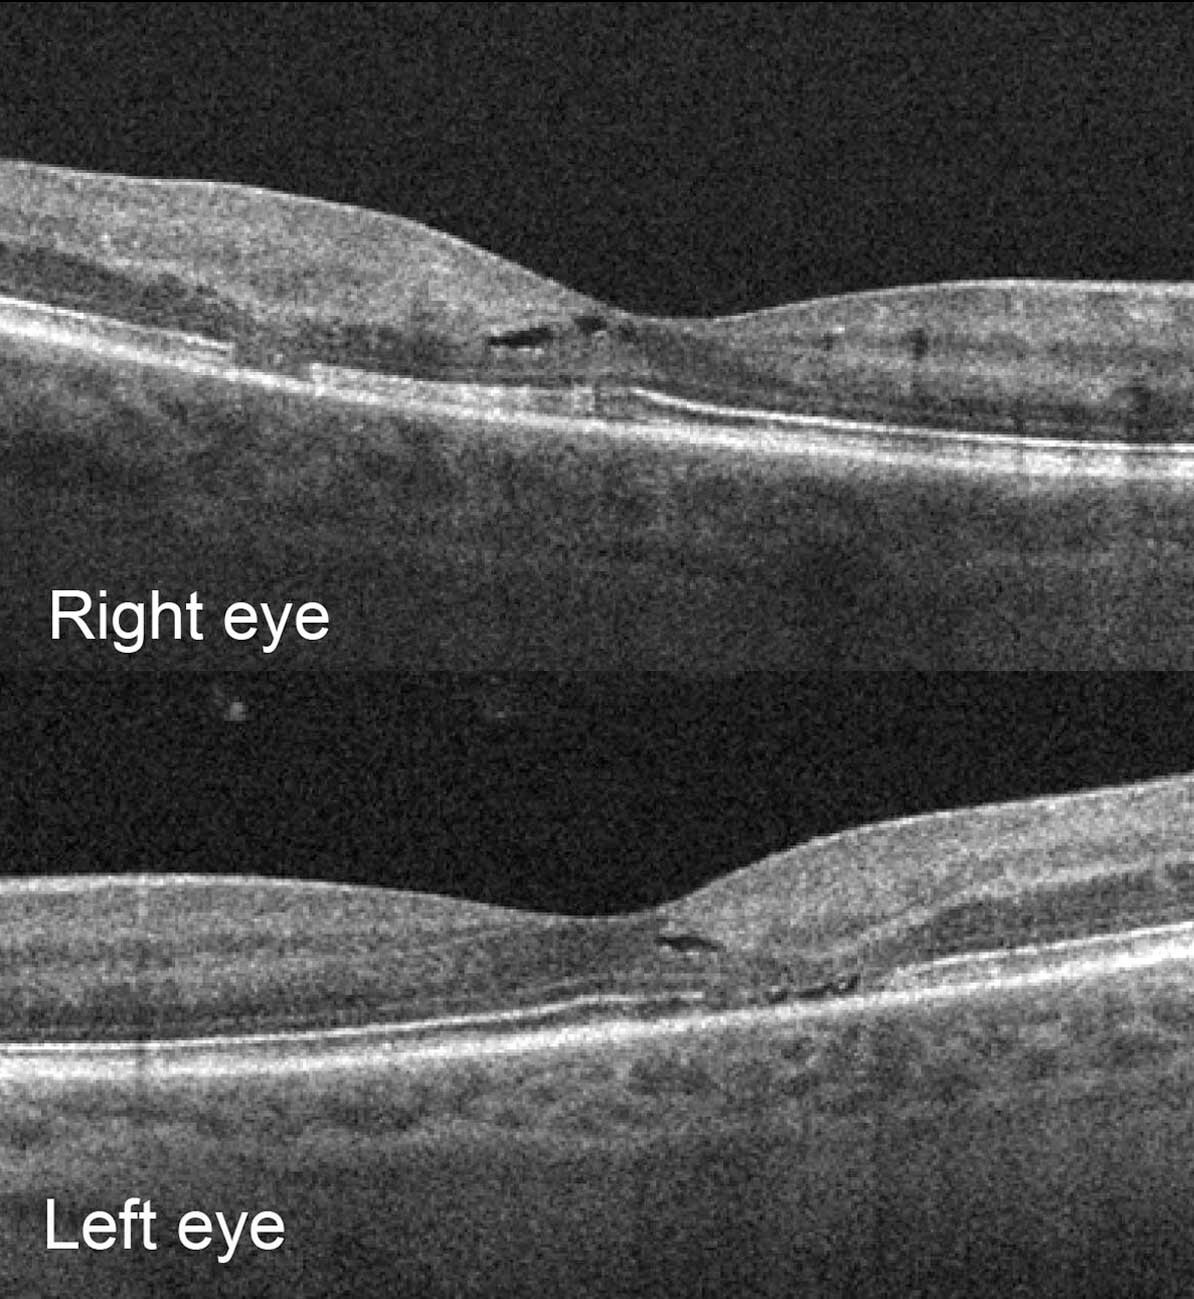  Horizontal optical coherence tomography (OCT) raster scans through the right and left maculae demonstrate hyporeflective inner retinal cavities and outer retinal loss temporal to the foveae.